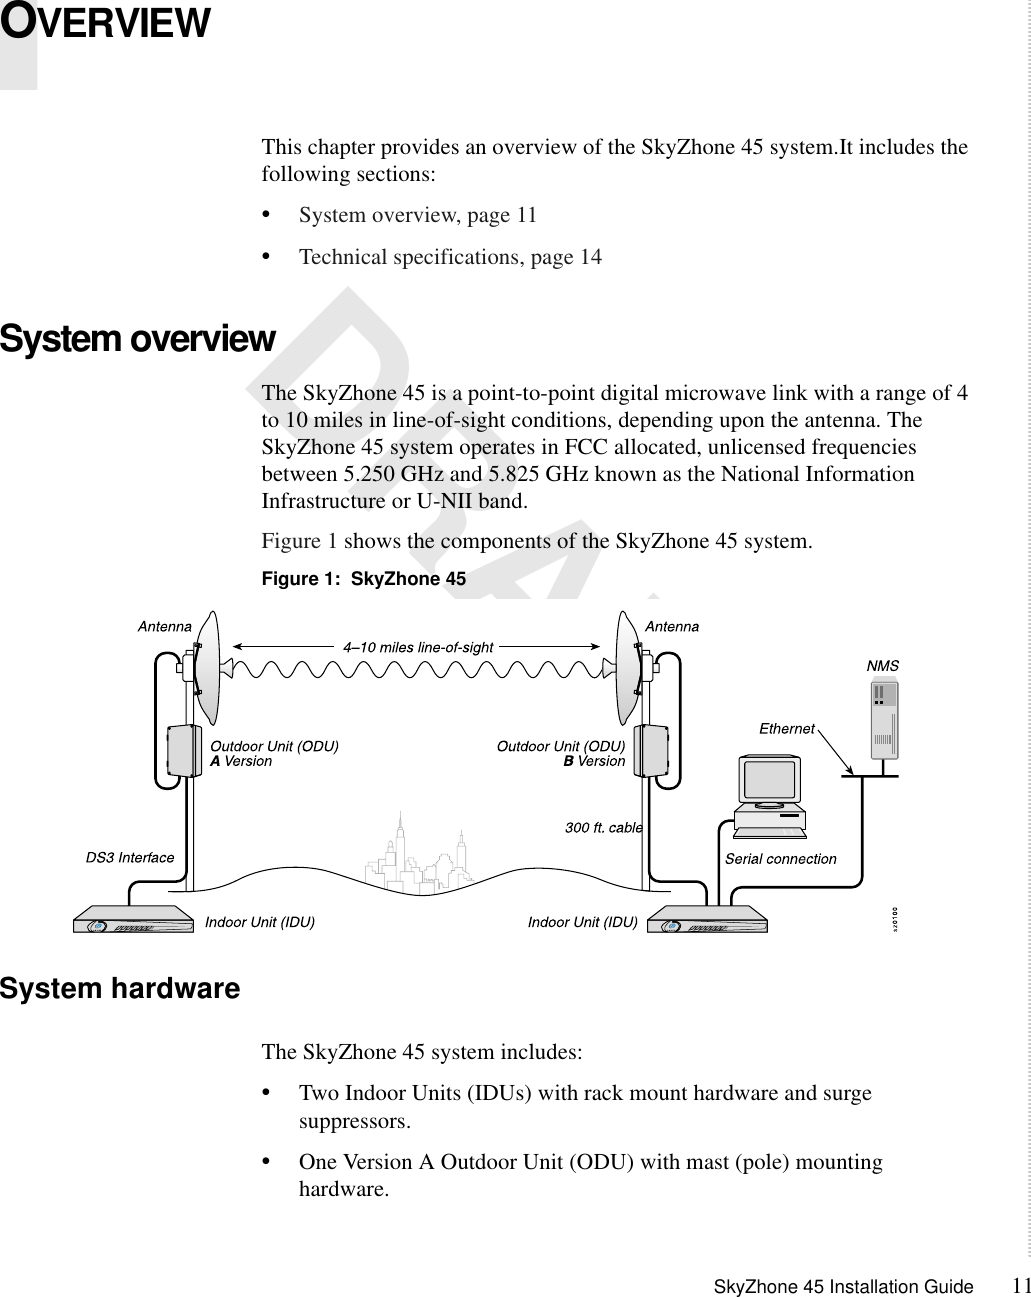 SkyZhone 45 Installation Guide 111 DRAFTOVERVIEWThis chapter provides an overview of the SkyZhone 45 system.It includes the following sections:•System overview, page 11•Technical specifications, page 14System overviewThe SkyZhone 45 is a point-to-point digital microwave link with a range of 4 to 10 miles in line-of-sight conditions, depending upon the antenna. The SkyZhone 45 system operates in FCC allocated, unlicensed frequencies between 5.250 GHz and 5.825 GHz known as the National Information Infrastructure or U-NII band.Figure 1 shows the components of the SkyZhone 45 system.Figure 1:  SkyZhone 45 System hardwareThe SkyZhone 45 system includes:•Two Indoor Units (IDUs) with rack mount hardware and surge suppressors.•One Version A Outdoor Unit (ODU) with mast (pole) mounting hardware.